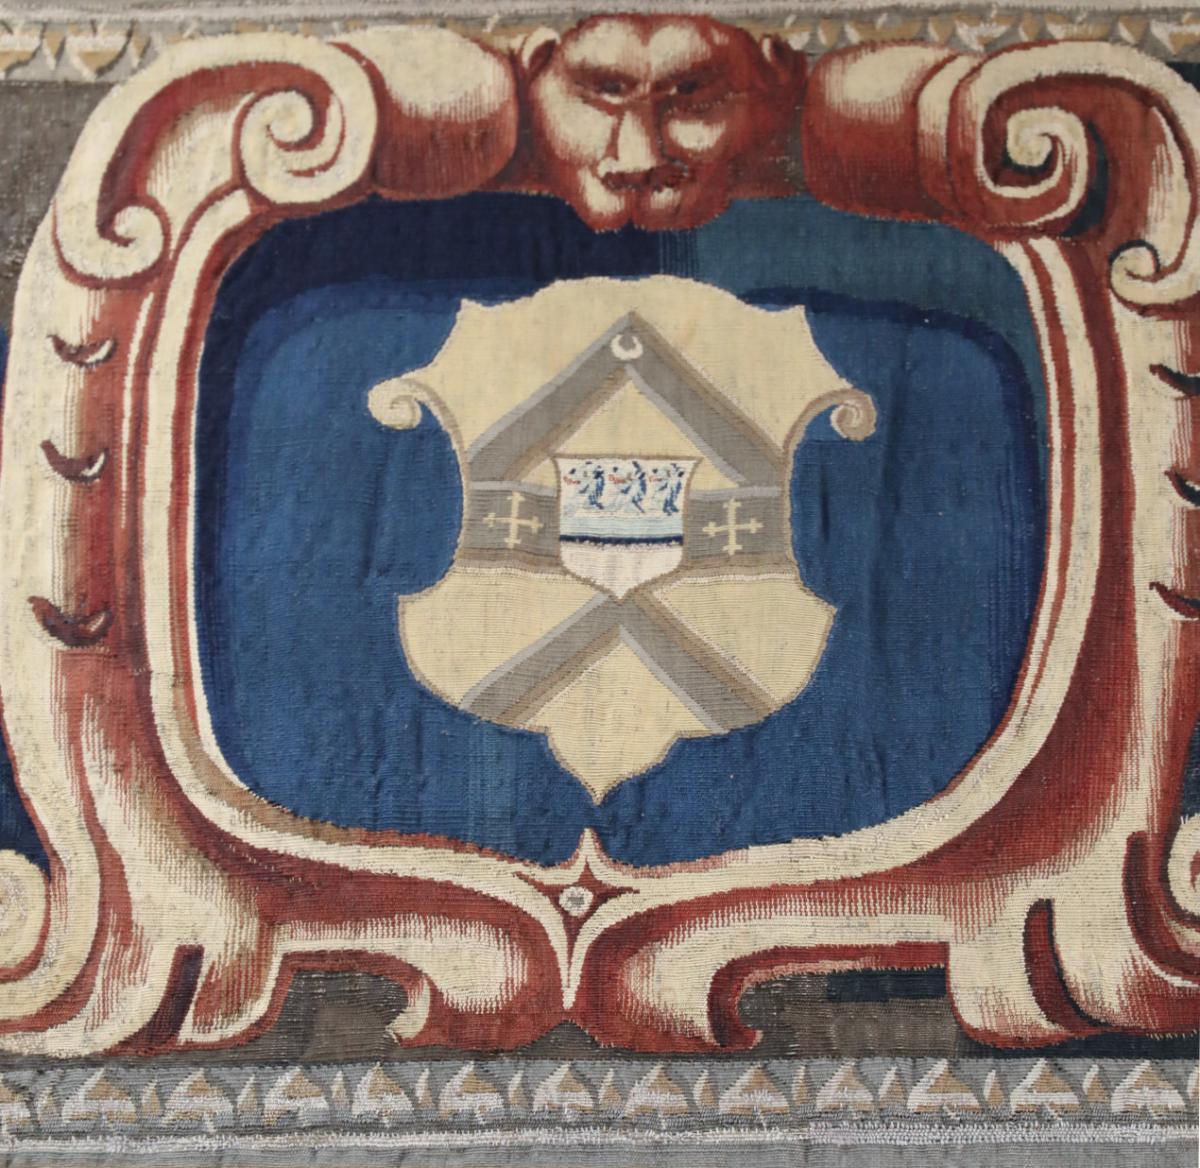 Coat of arms on Solebay tapestry